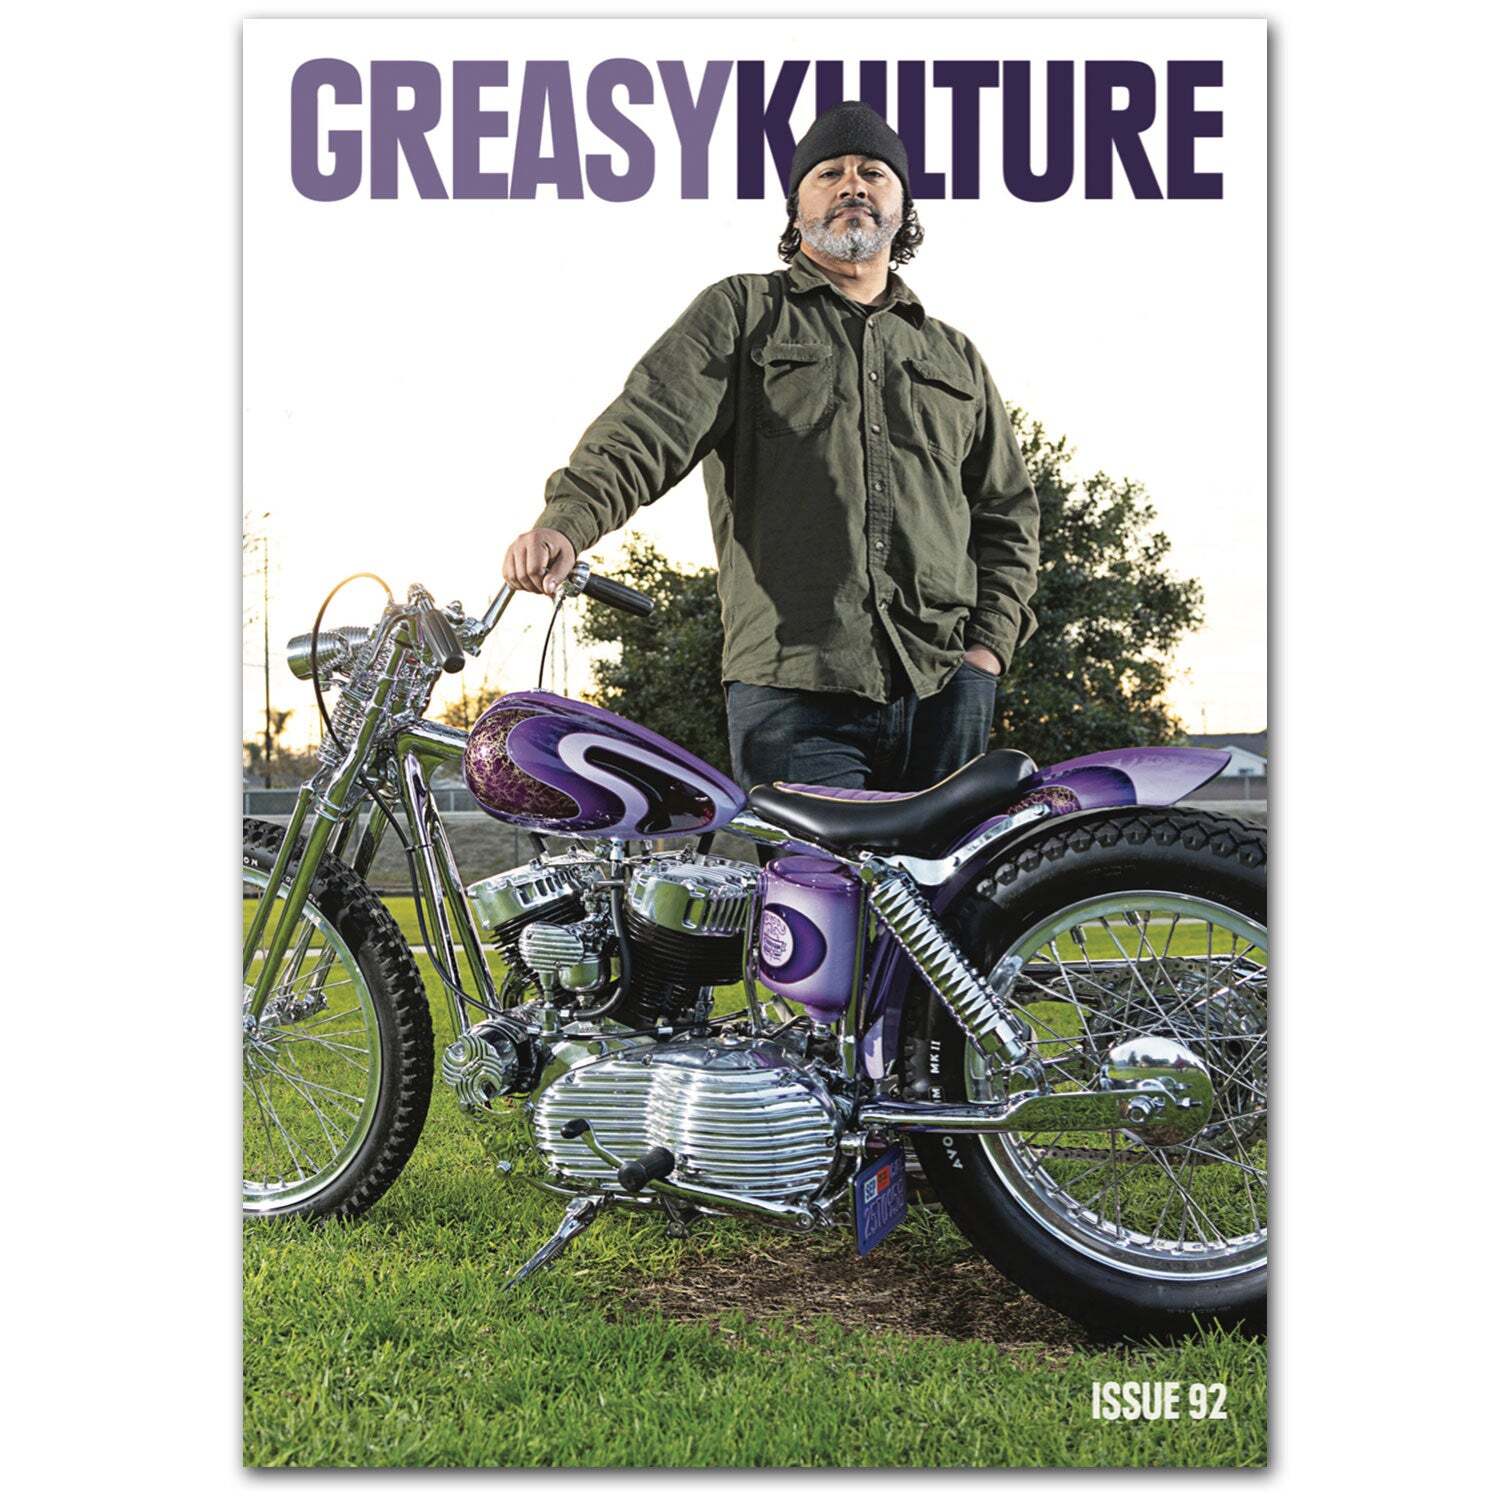 Greasy Kulture magazine issue#92 CYCLE TRASH